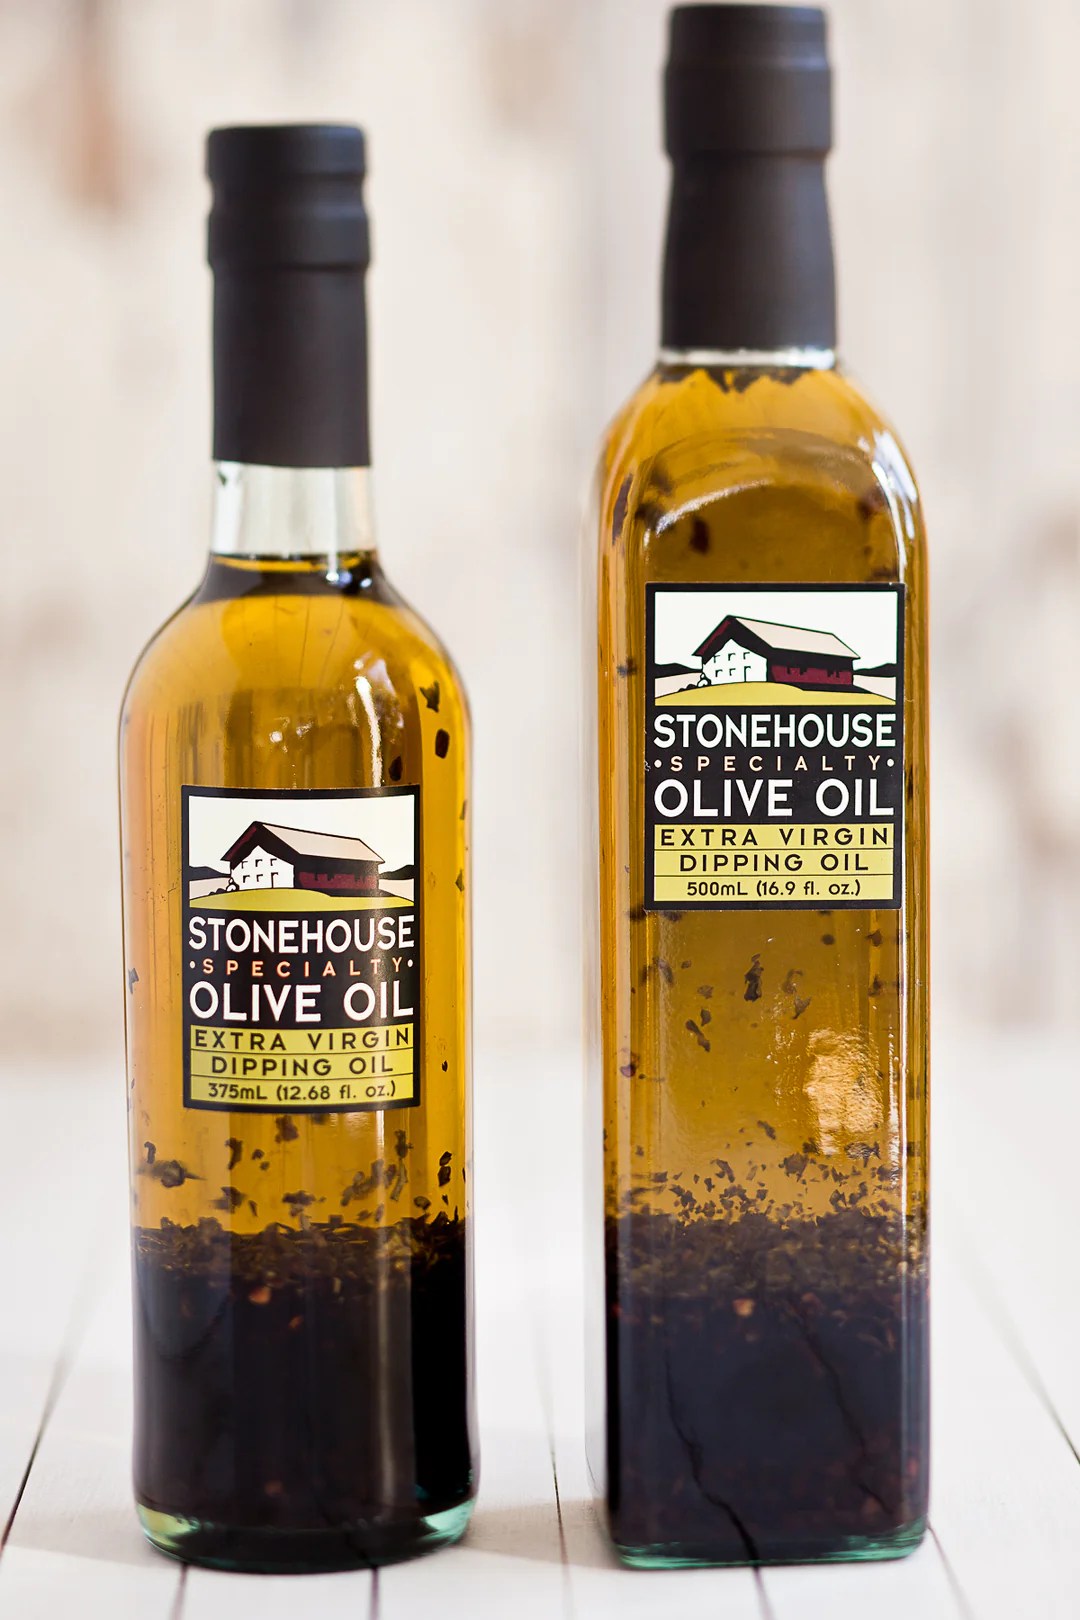 Two glass bottles of balsamic, herb dipping oil stand side by side with a blurred white background behind them.